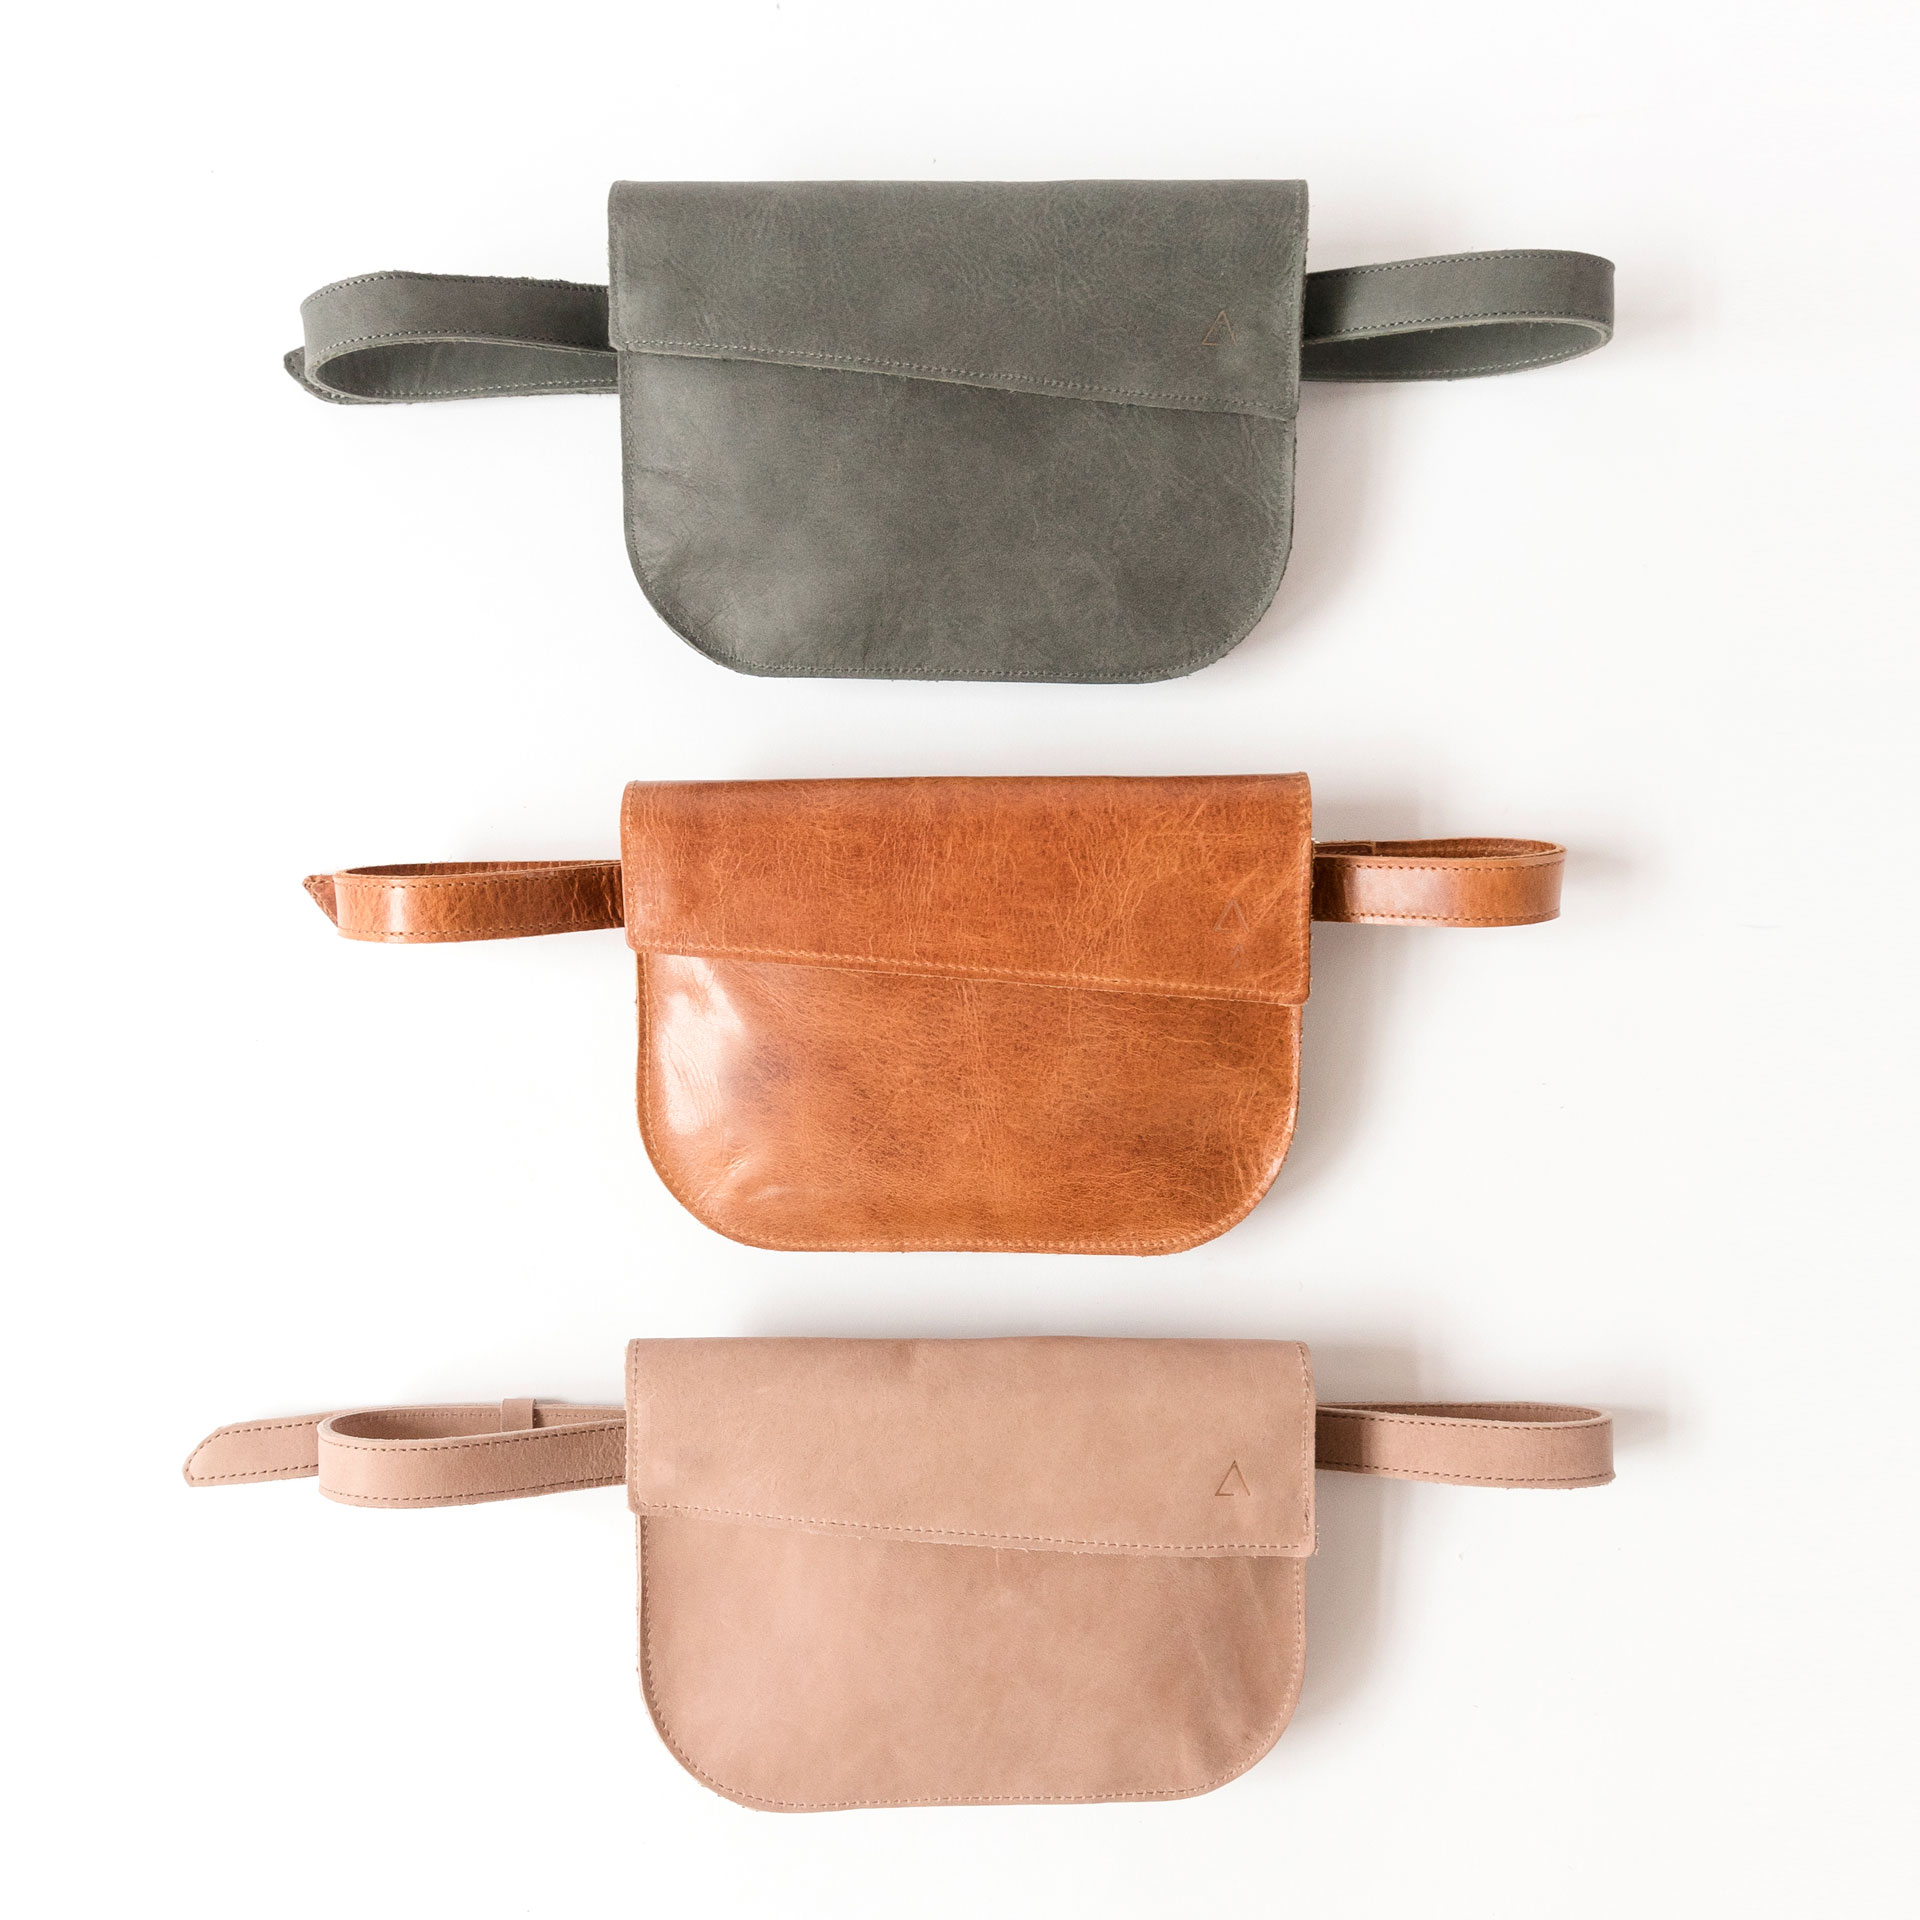 Crossbody Bags TEA in the colors stone gray, cognac oiled and light brown.